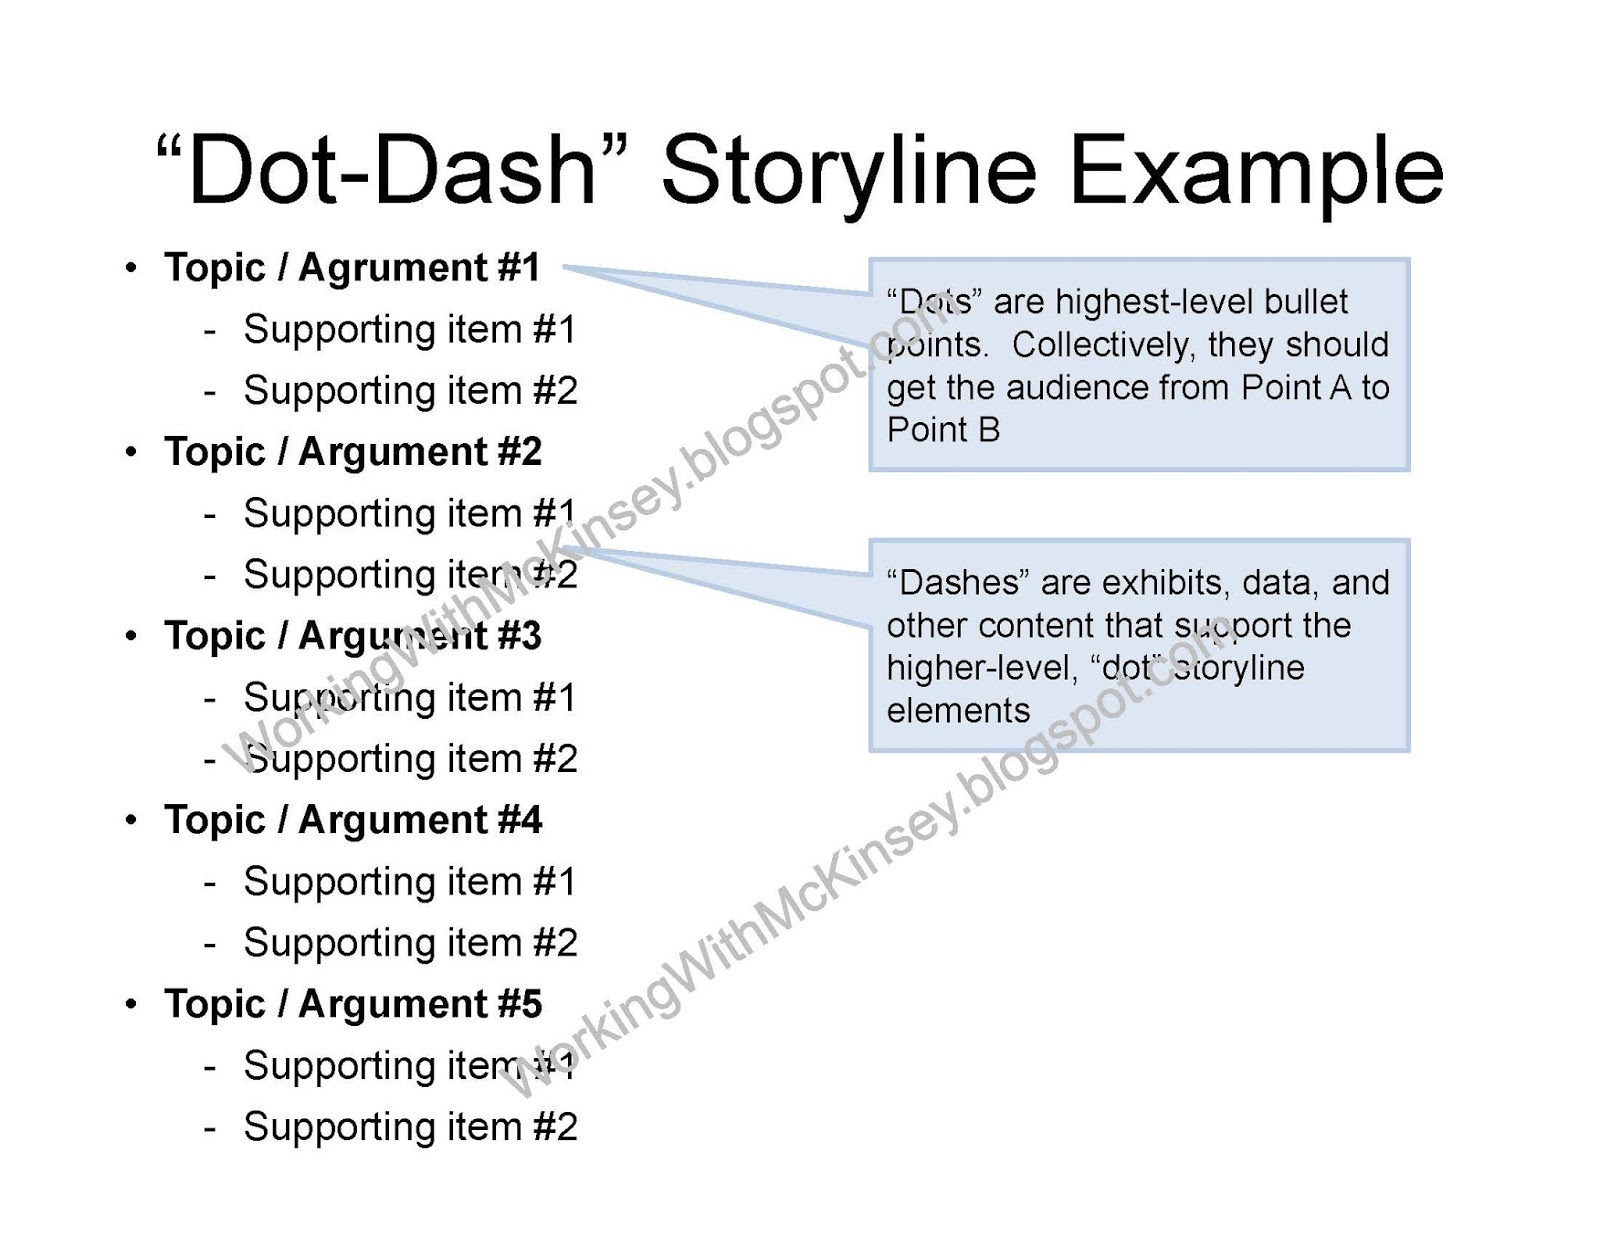 Working With Mckinsey Mckinsey Presentation Decks What Is The Storyline And What Is A Dot Dash